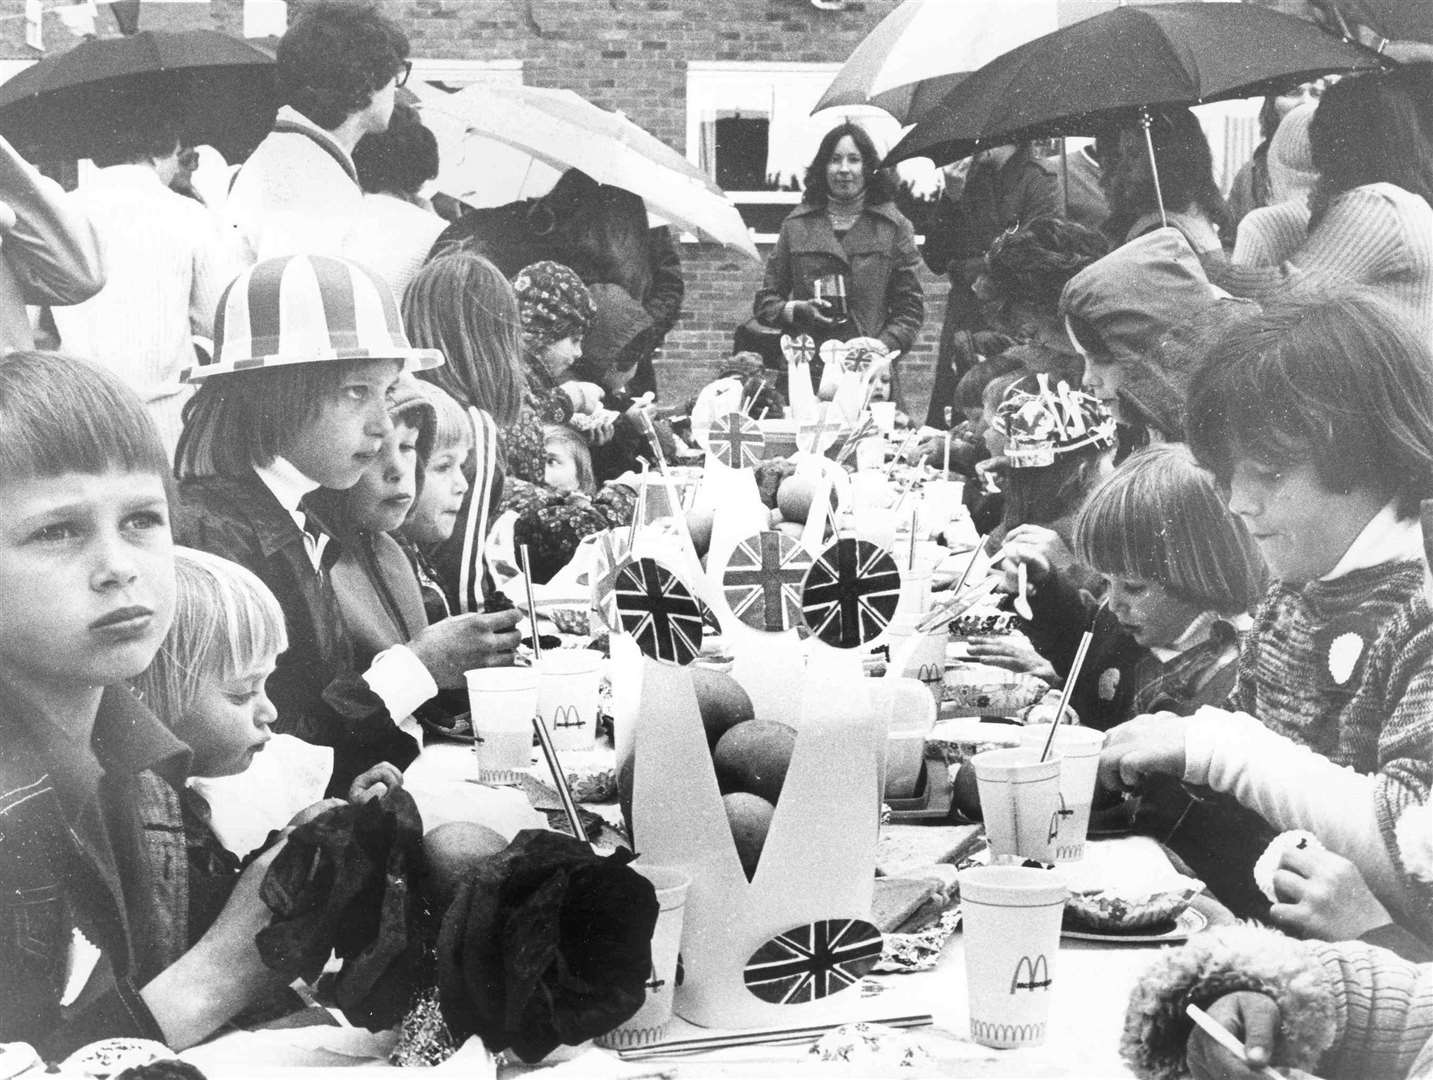 Street parties are the most popular and renowned events for celebrating a royal achievement. This one was held in Ragstone Road, Bearsted